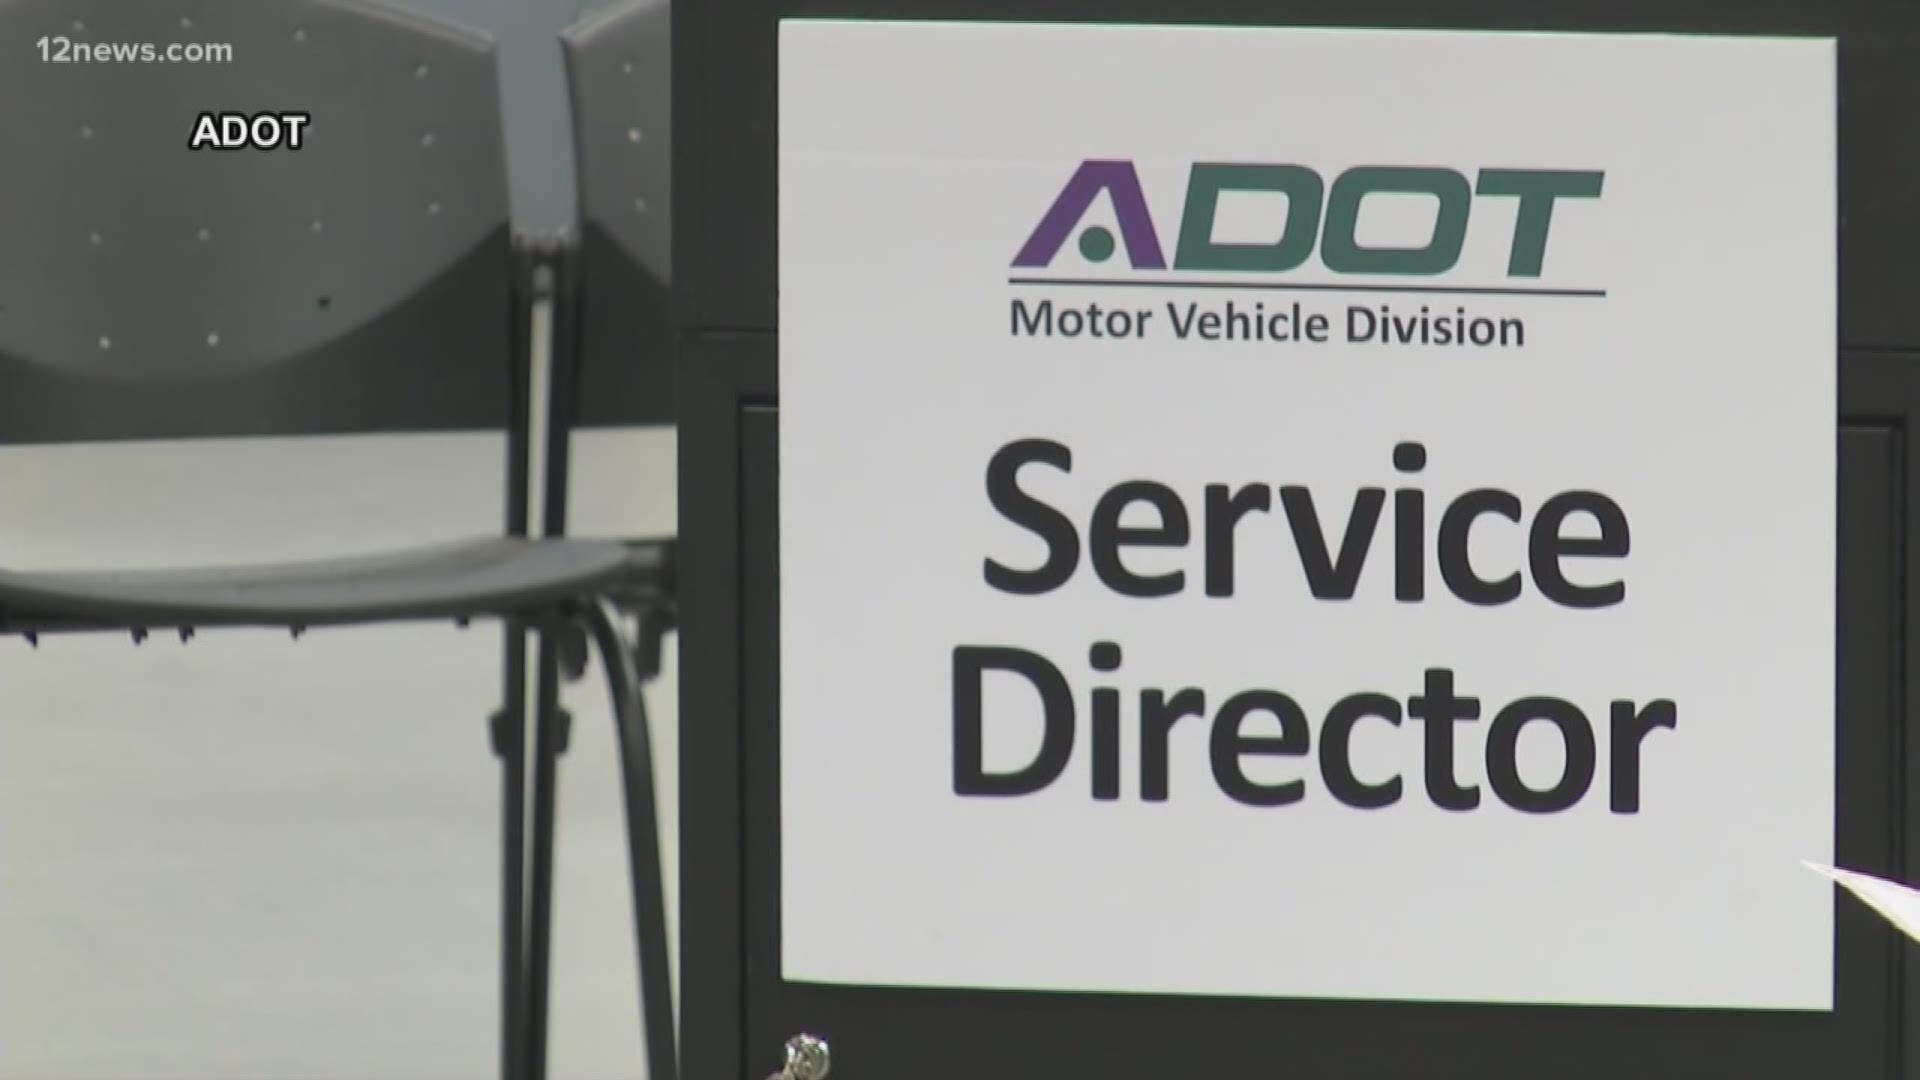 For one Valley woman the hassle of getting her new Arizona driver's license was increased when the MVD revoked her license just days after issuing it. And requiring her to provide documents she didn't even have.